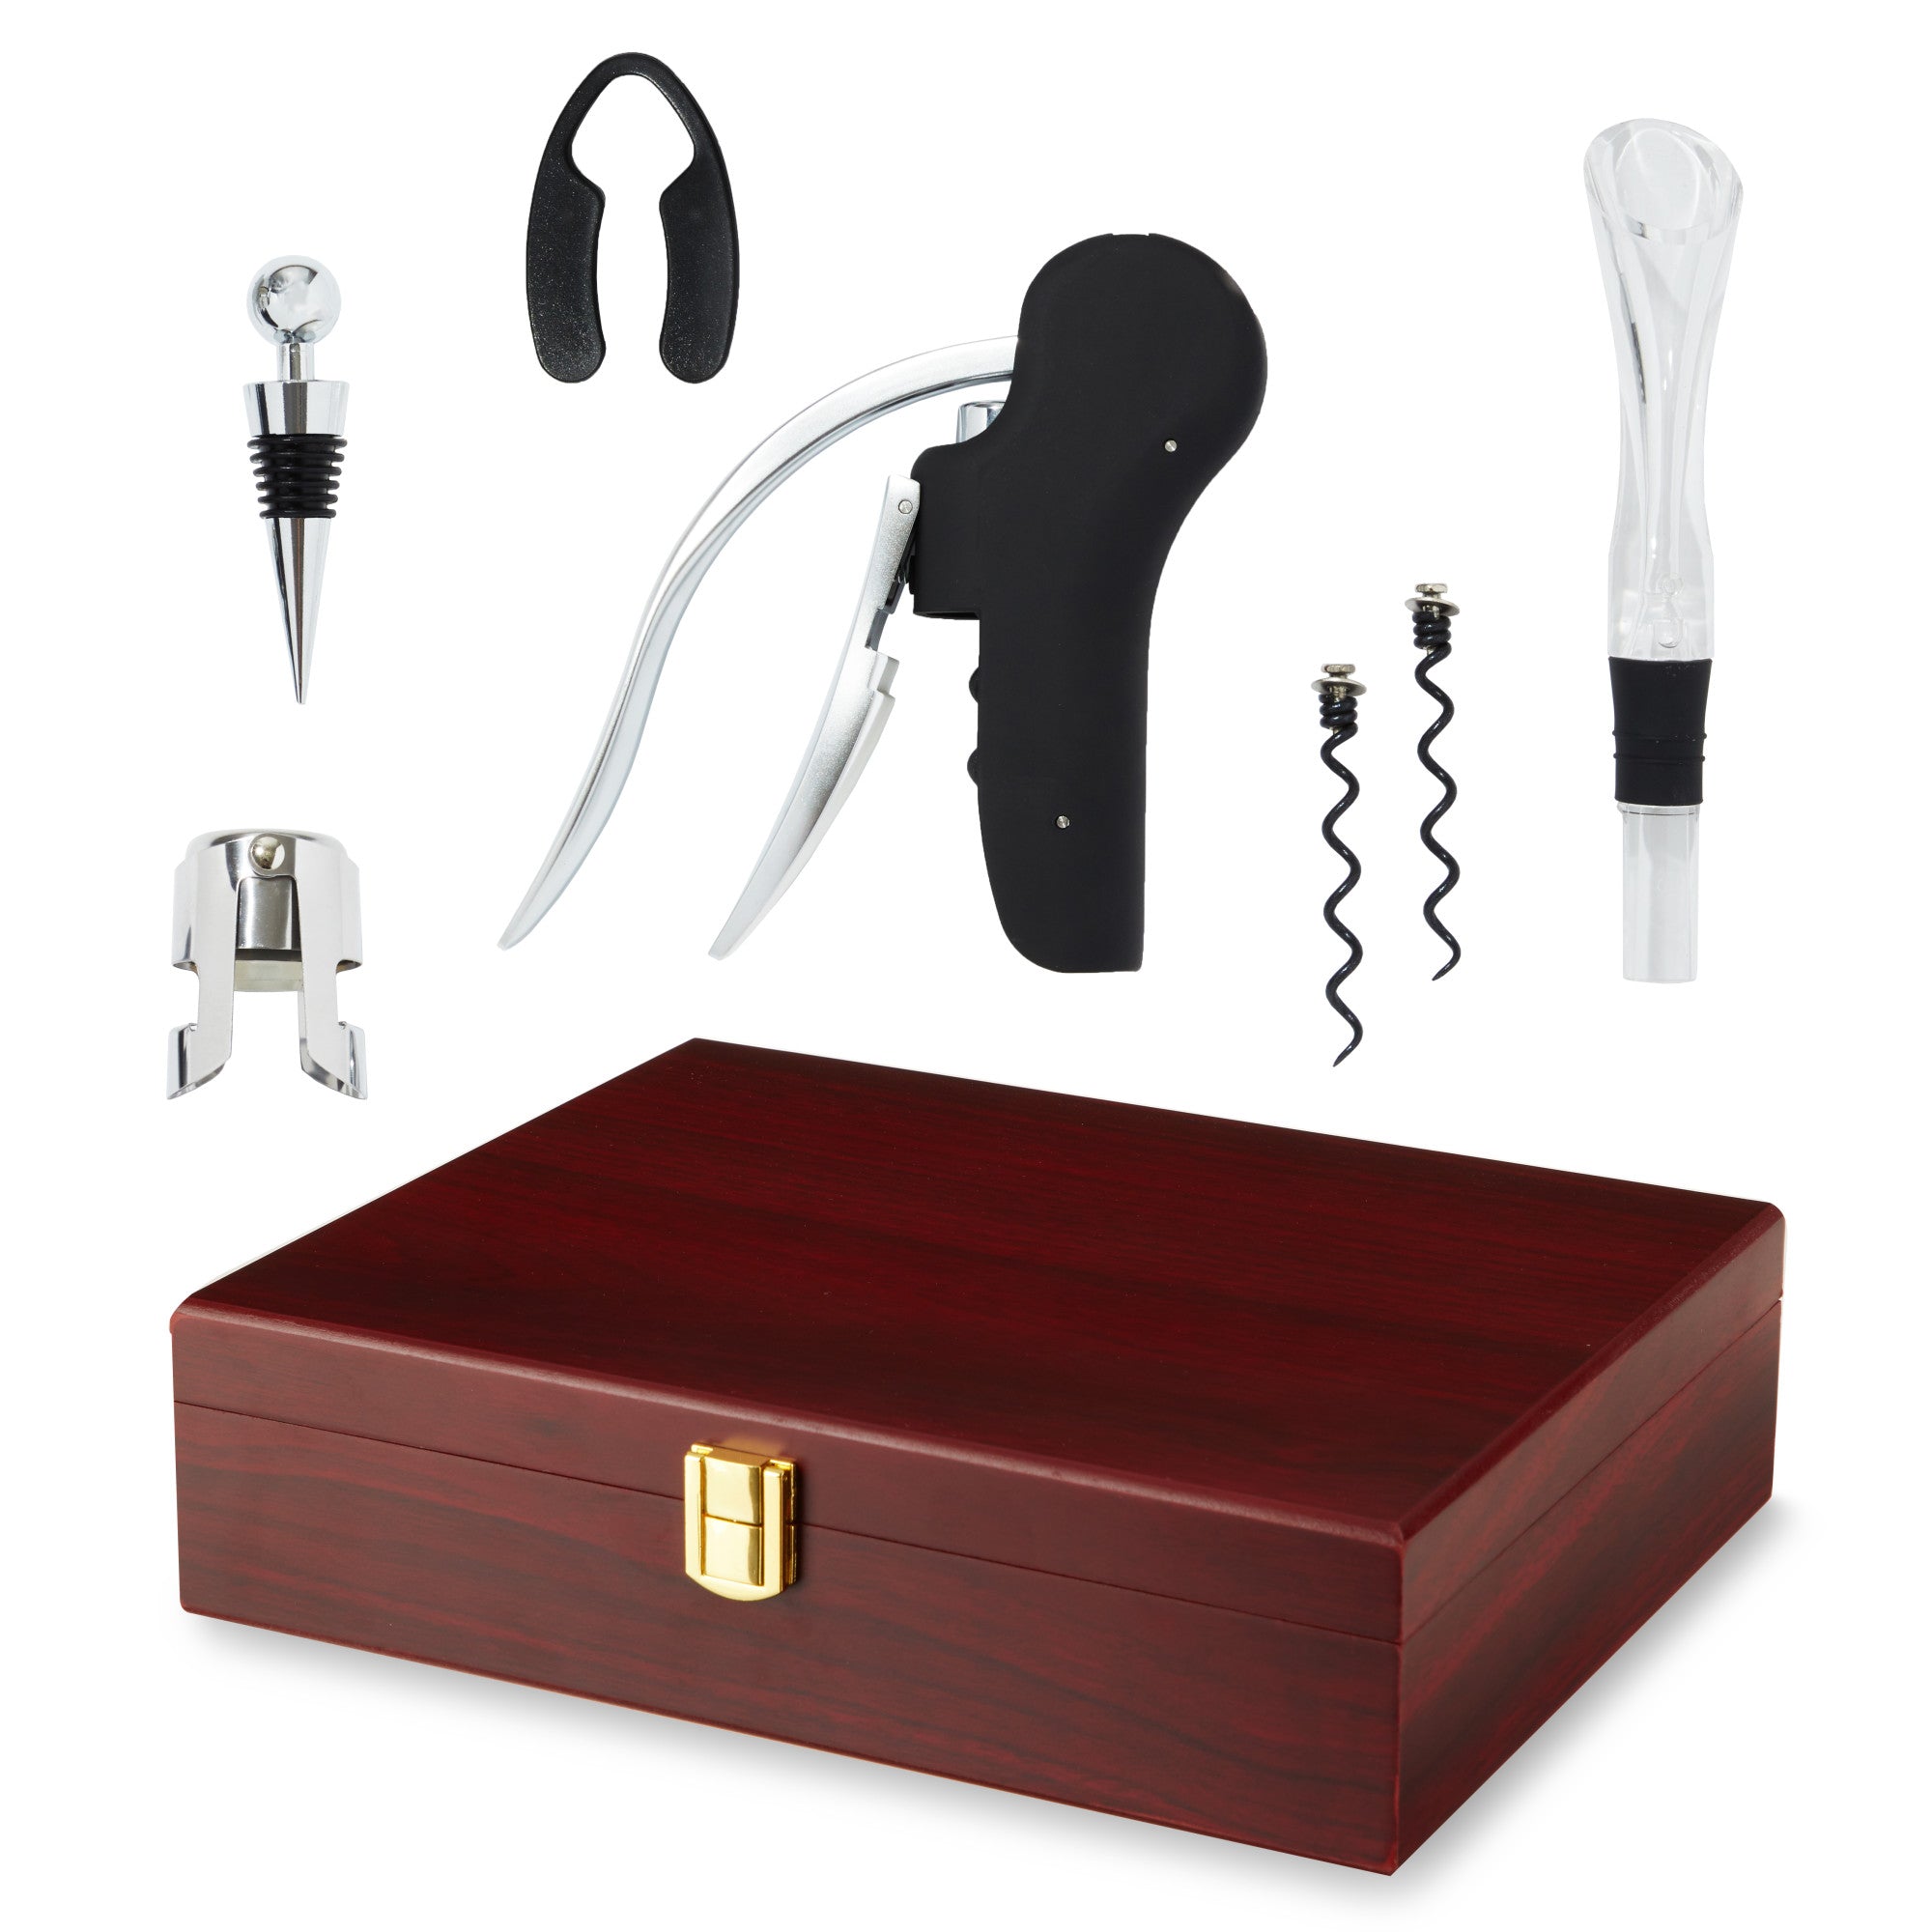 5 Piece Wine Tools Boxed Set by True (10680)